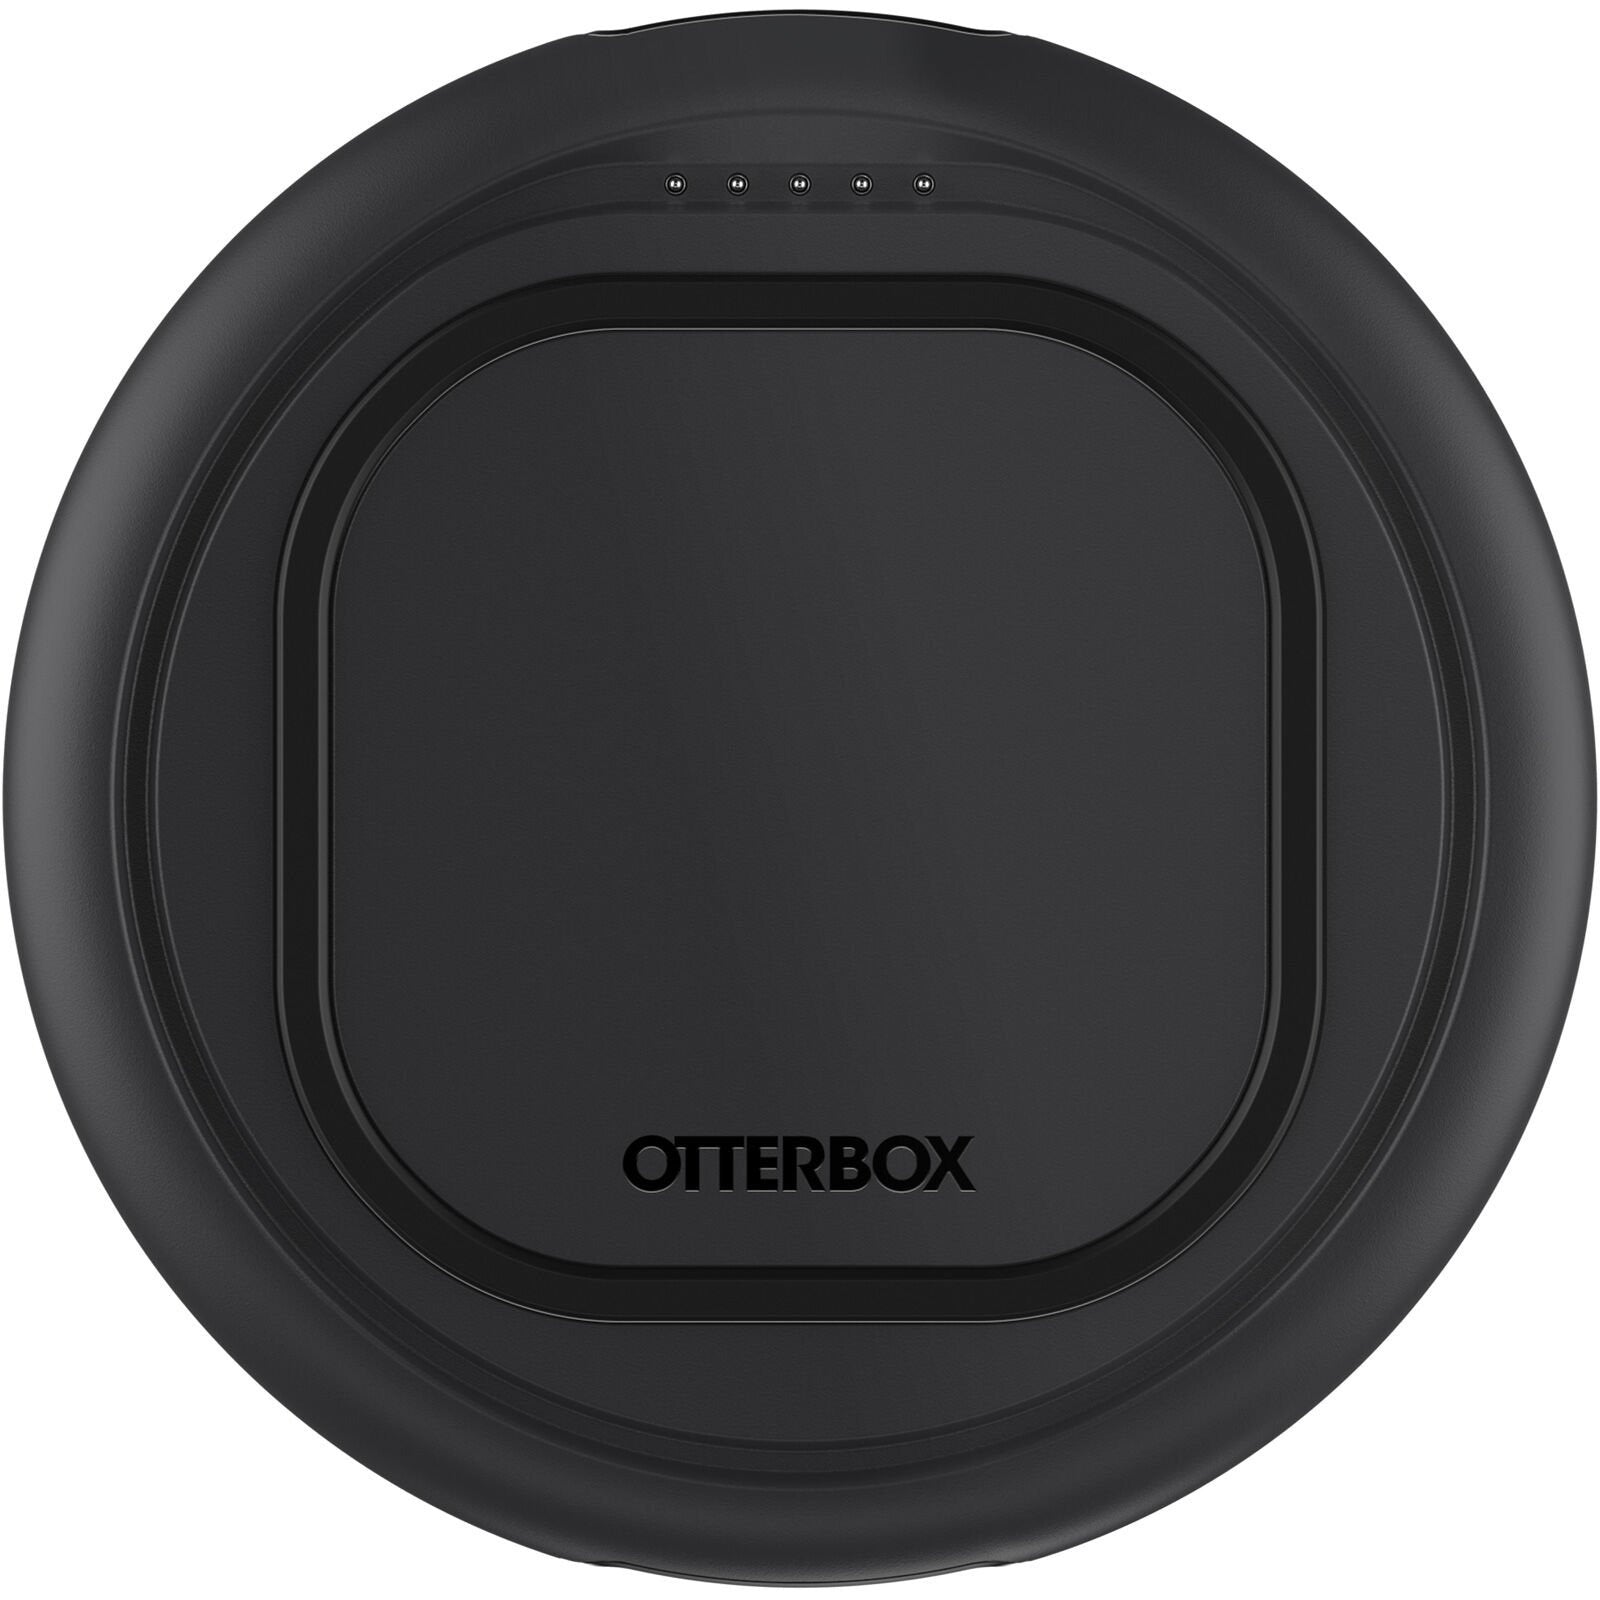 OtterBox OtterSpot Wireless Charging System Battery Only - Black (New)